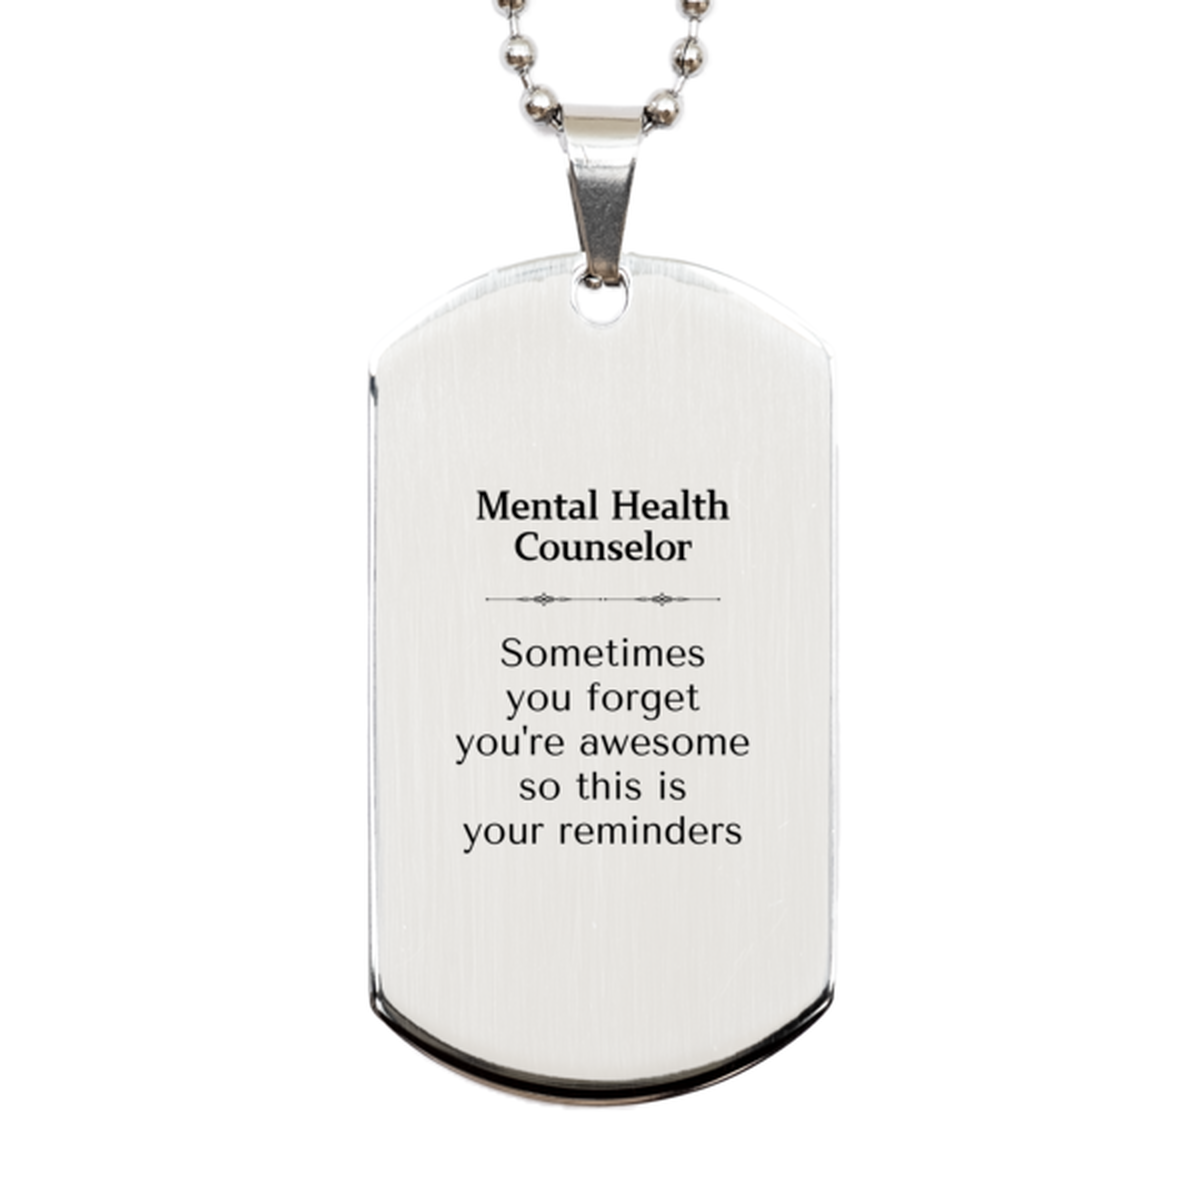 Sentimental Mental Health Counselor Silver Dog Tag, Mental Health Counselor Sometimes you forget you're awesome so this is your reminders, Graduation Christmas Birthday Gifts for Mental Health Counselor, Men, Women, Coworkers